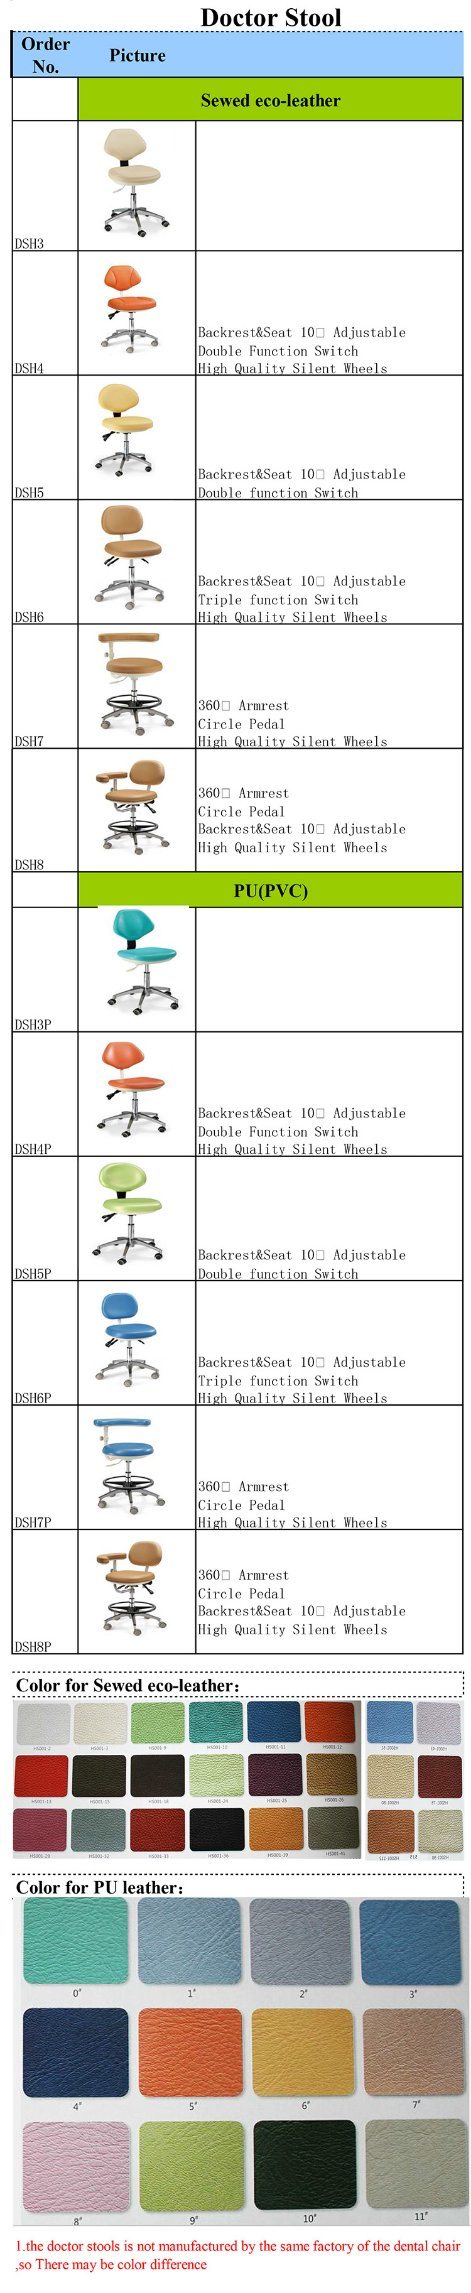 Doctor Stool with Various Types